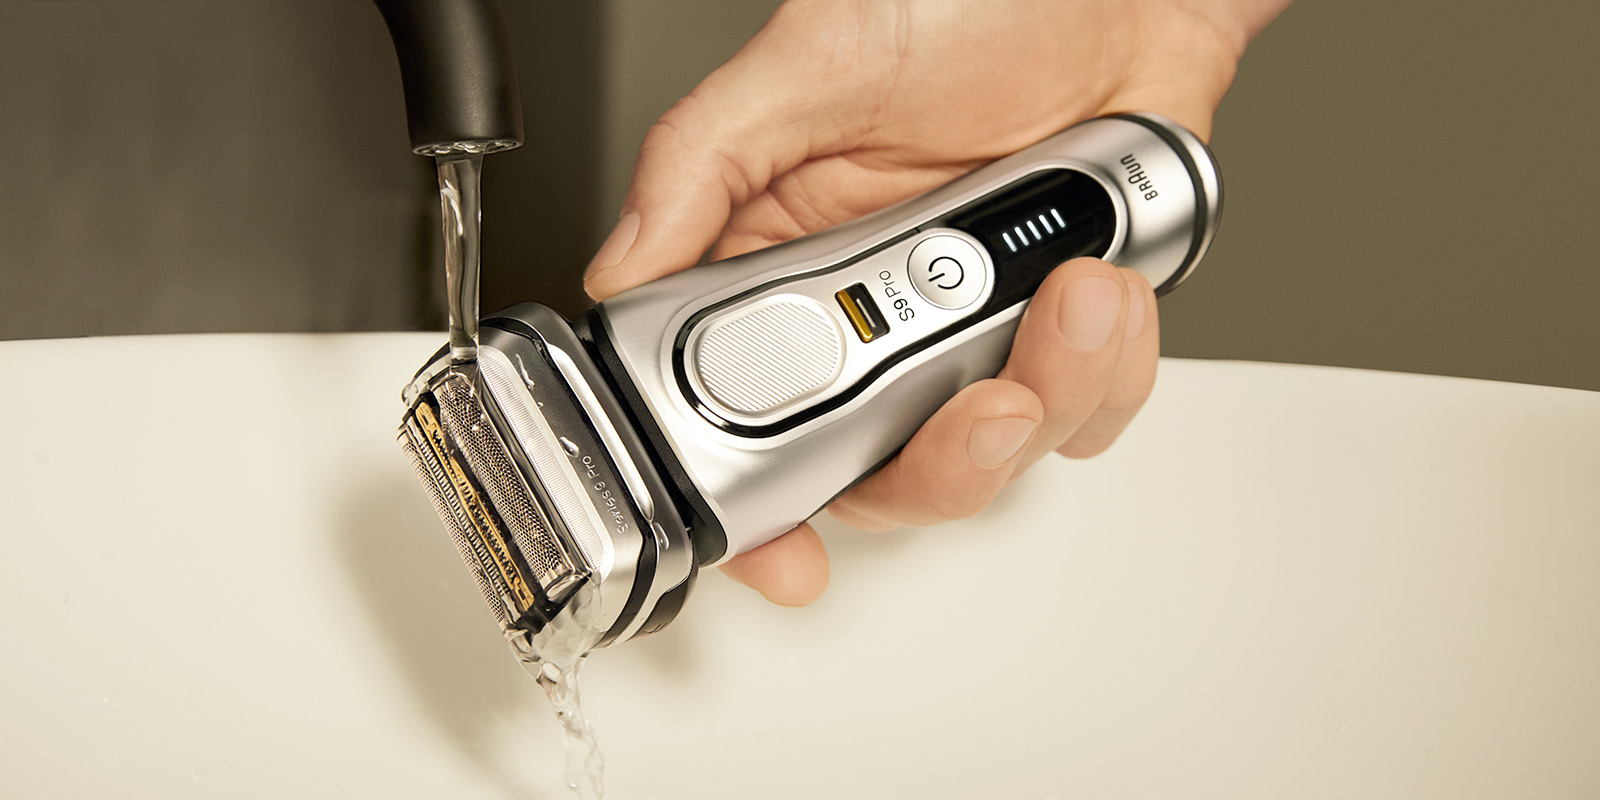 How to clean your shaver with Braun Clean and Renew